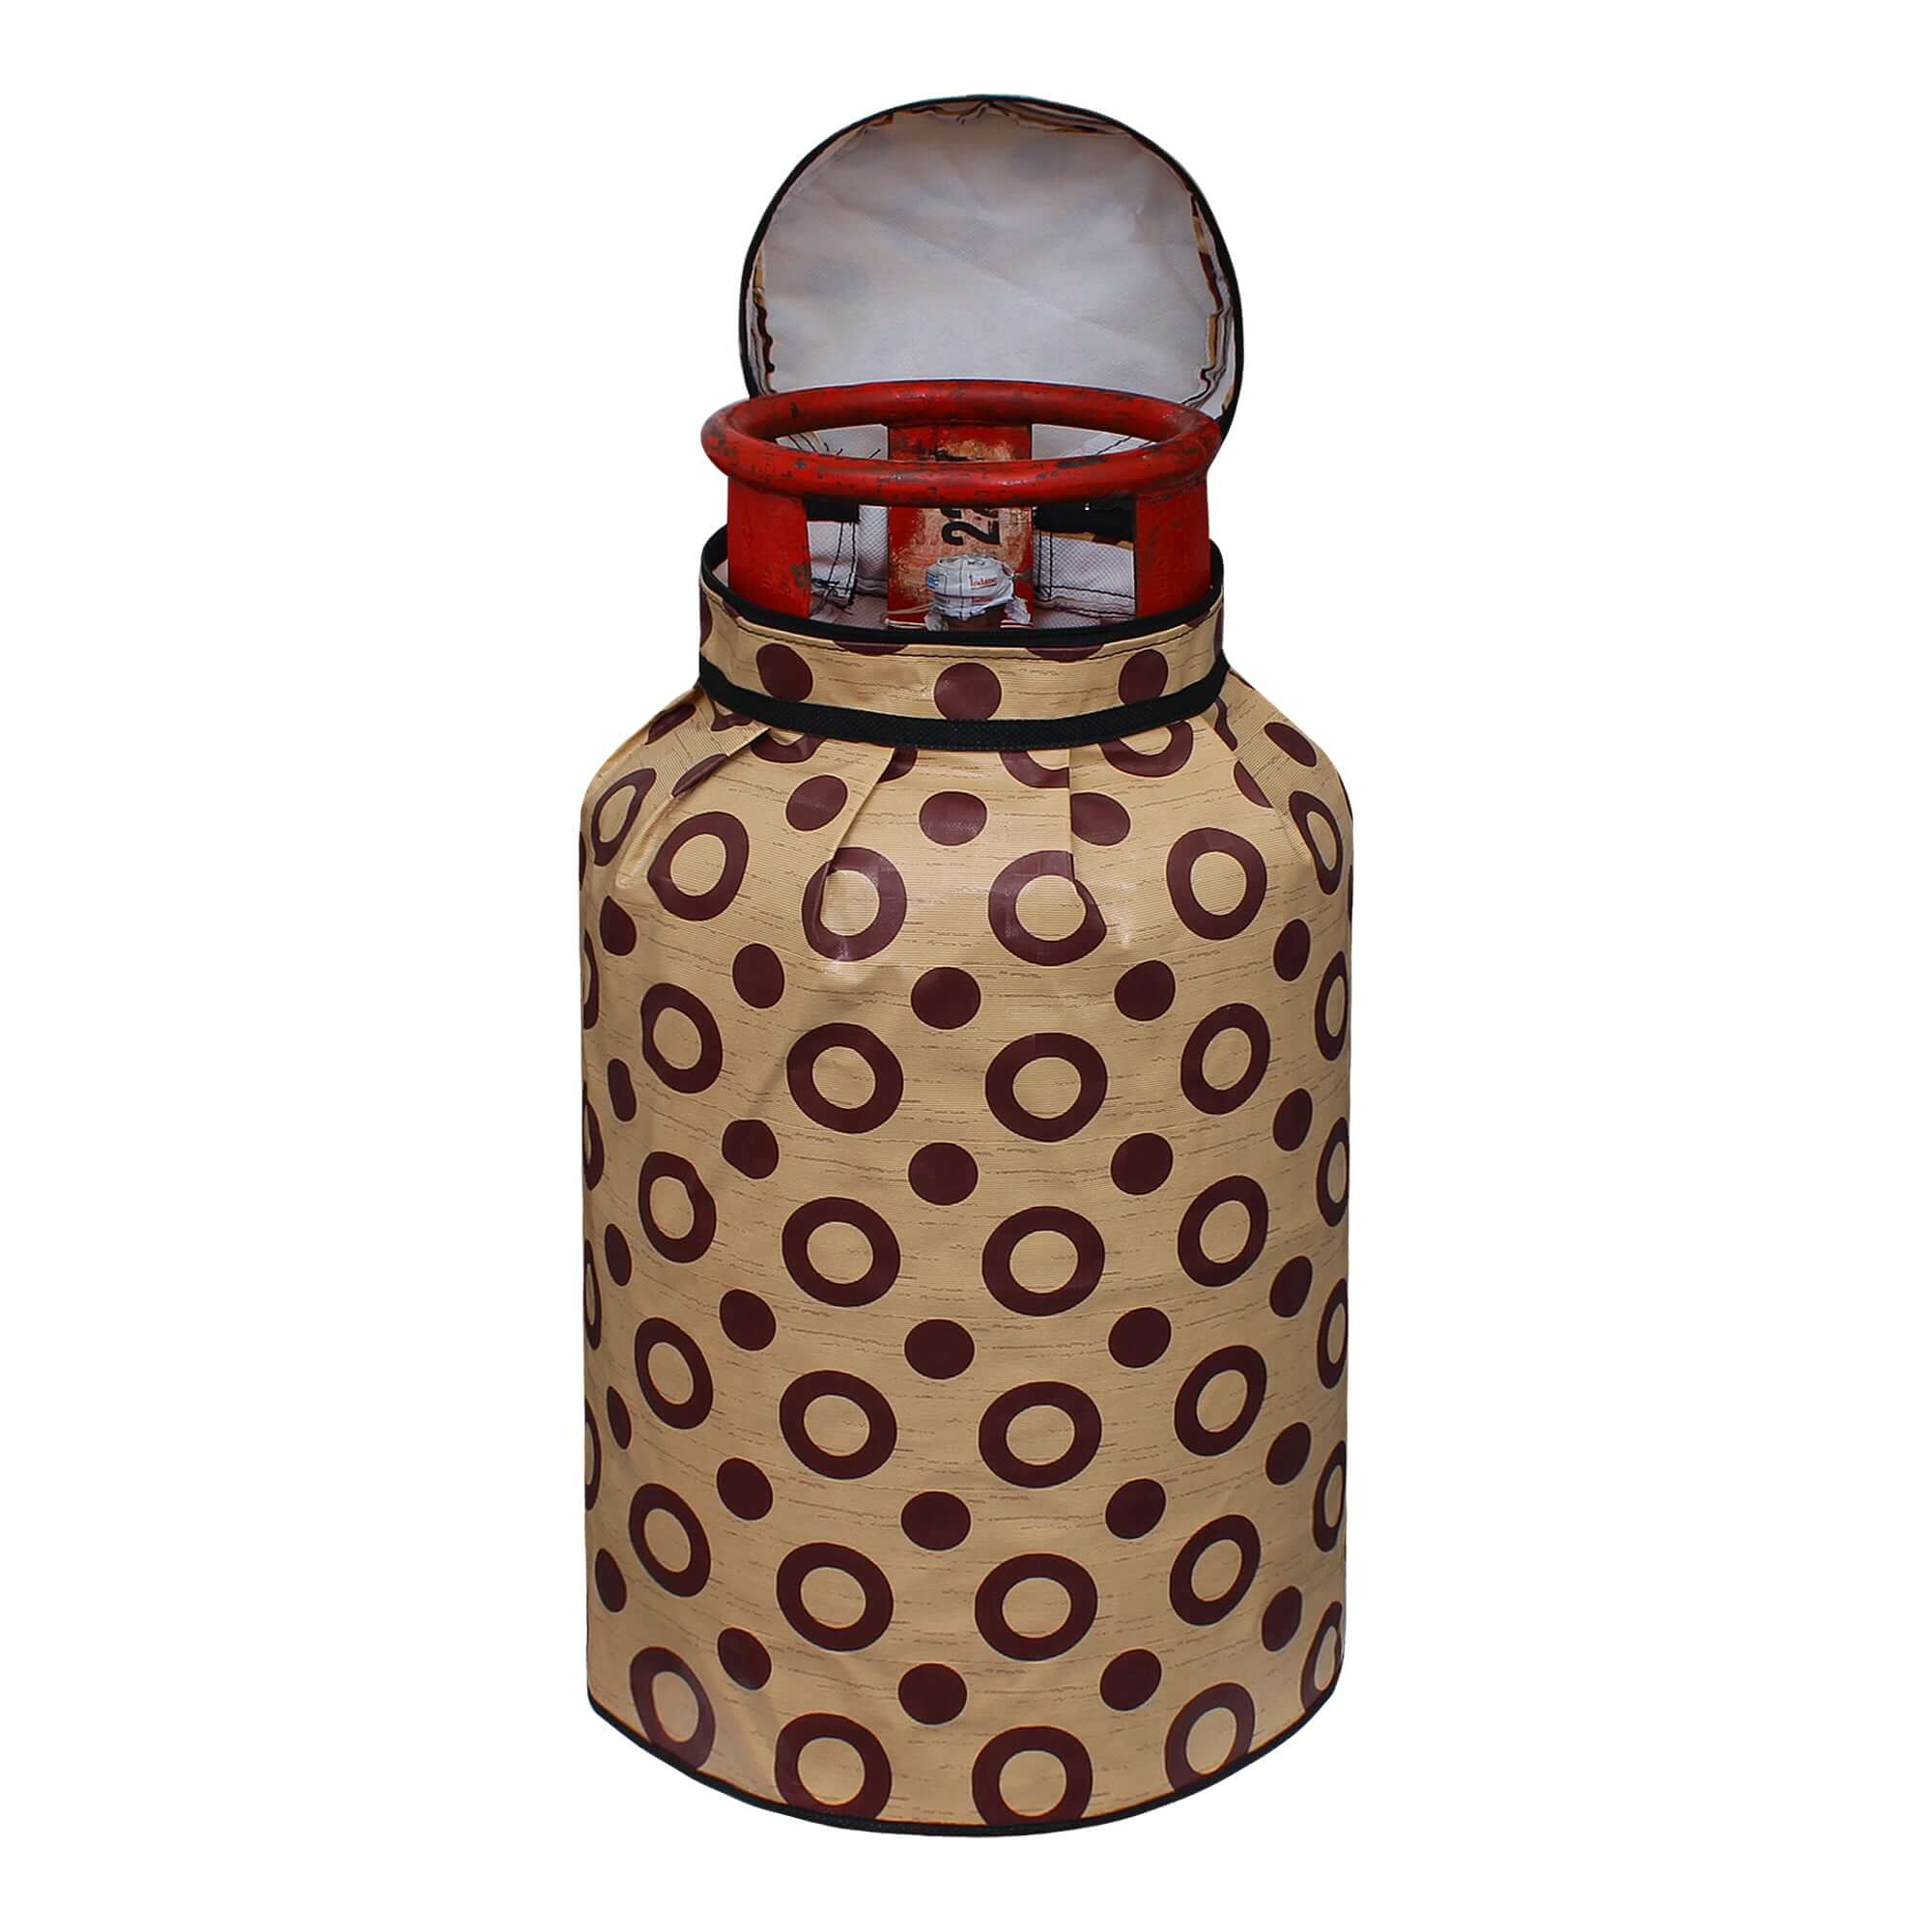 LPG Gas Cylinder Cover, SA02 - Dream Care Furnishings Private Limited